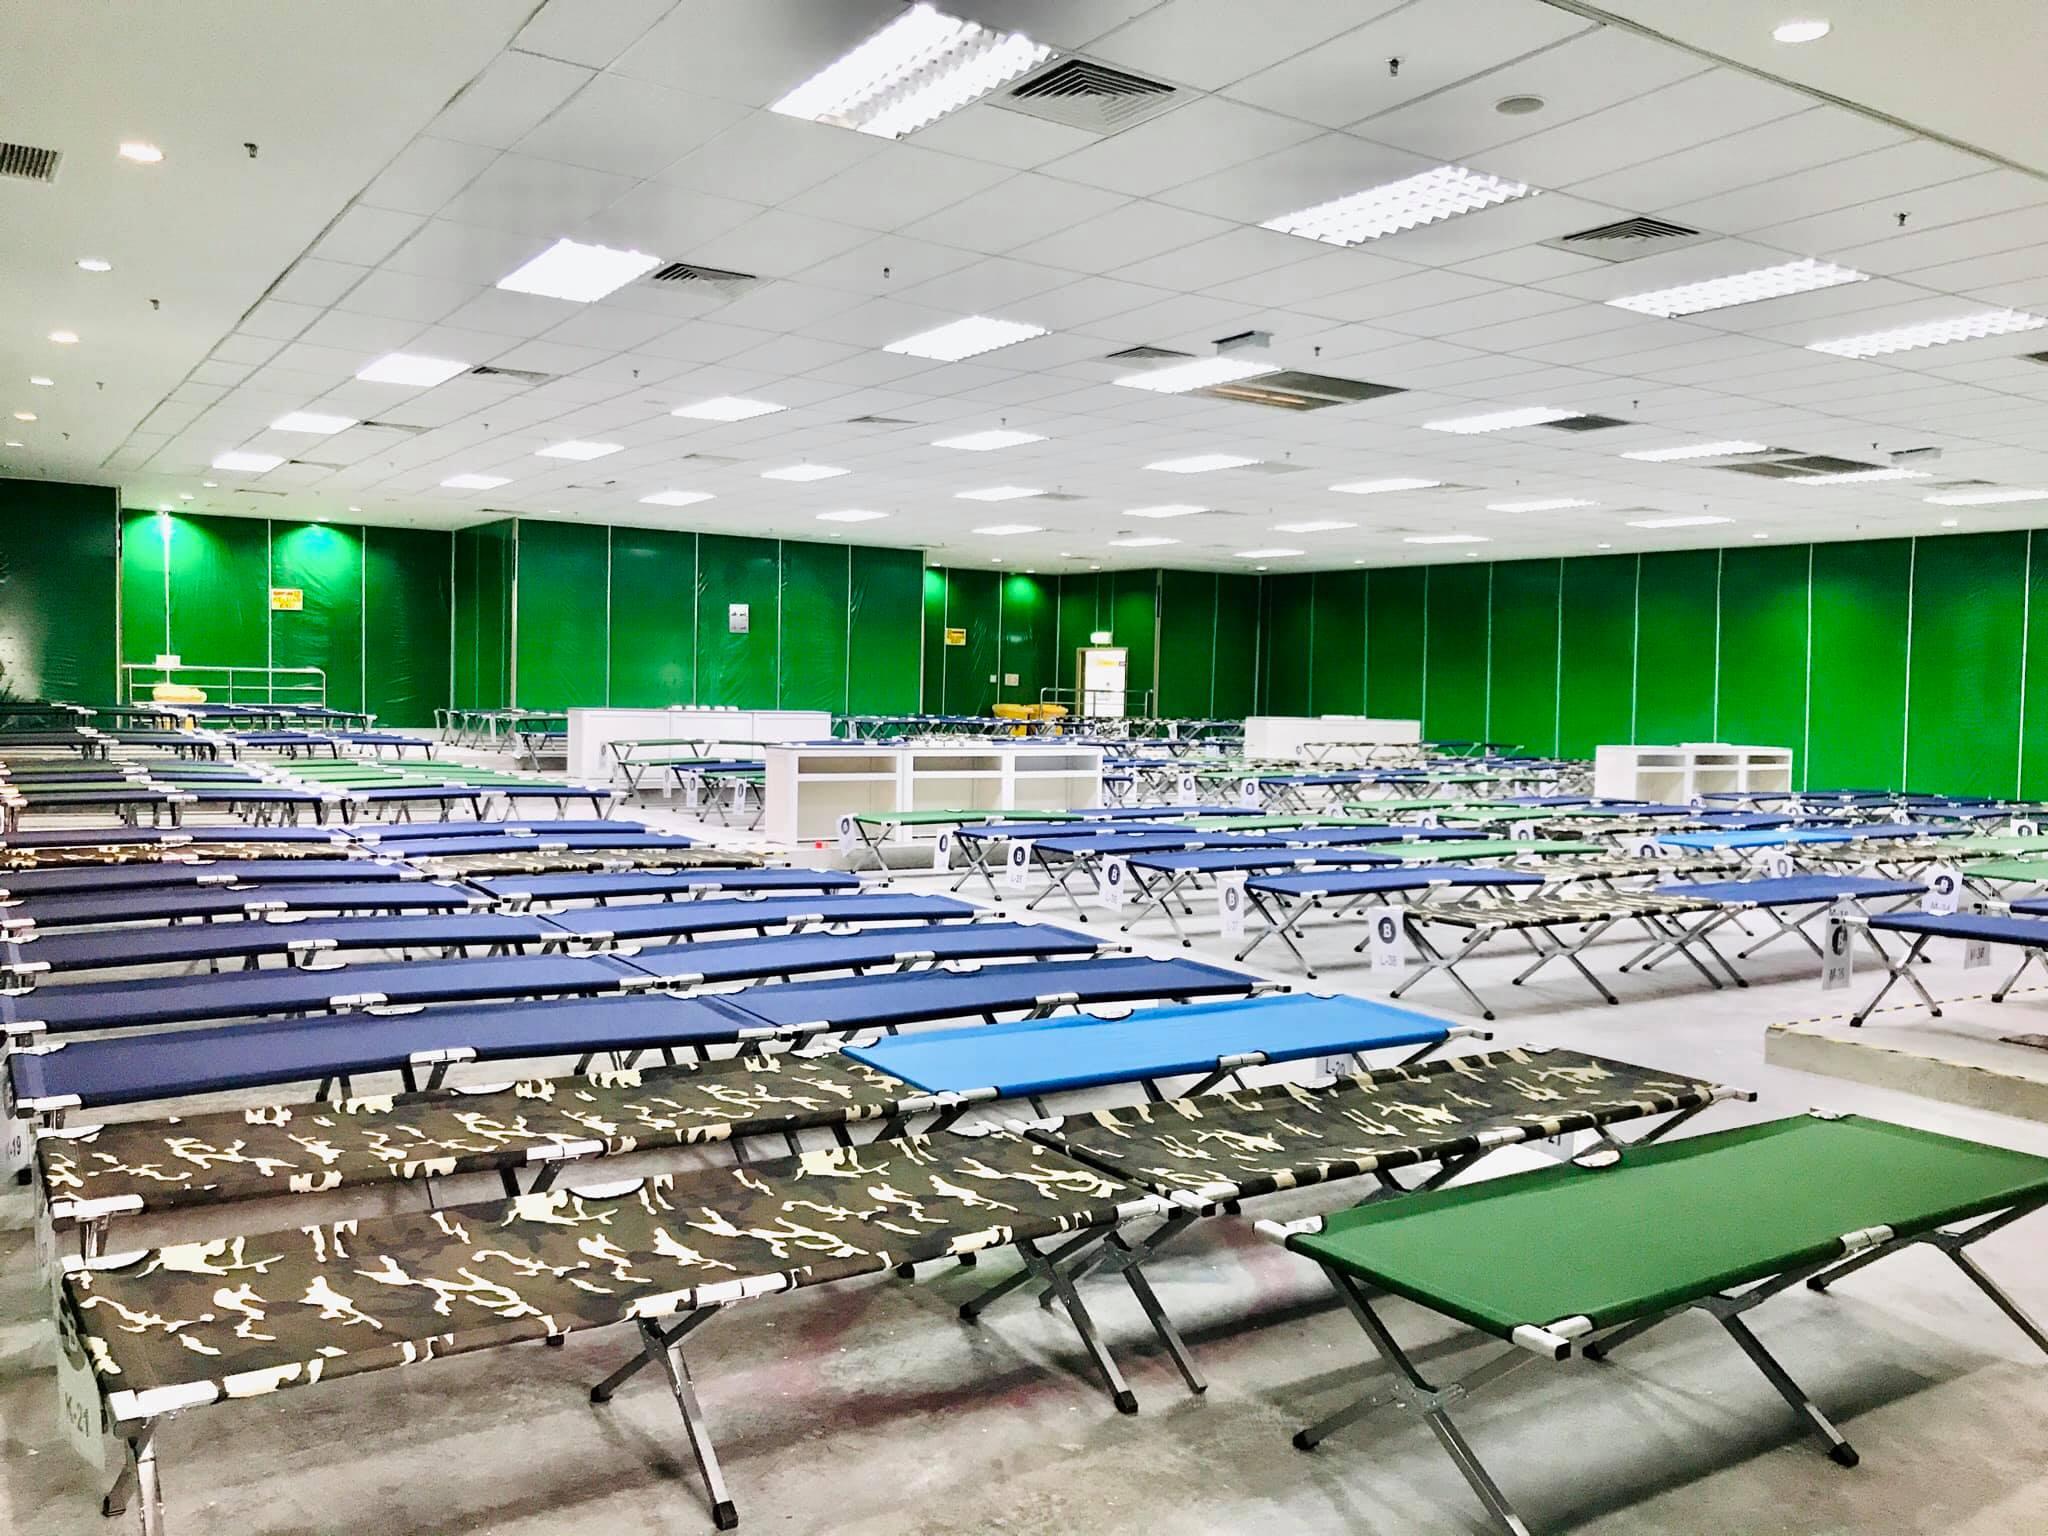 Hundreds of beds lined up at the Covid-19 Quarantine and Low Risk Treatment Centre at the Malaysia Agro Exposition Park in Serdang, which the government is considering using as new infections threaten its resources to fight the pandemic. Photo: Facebook